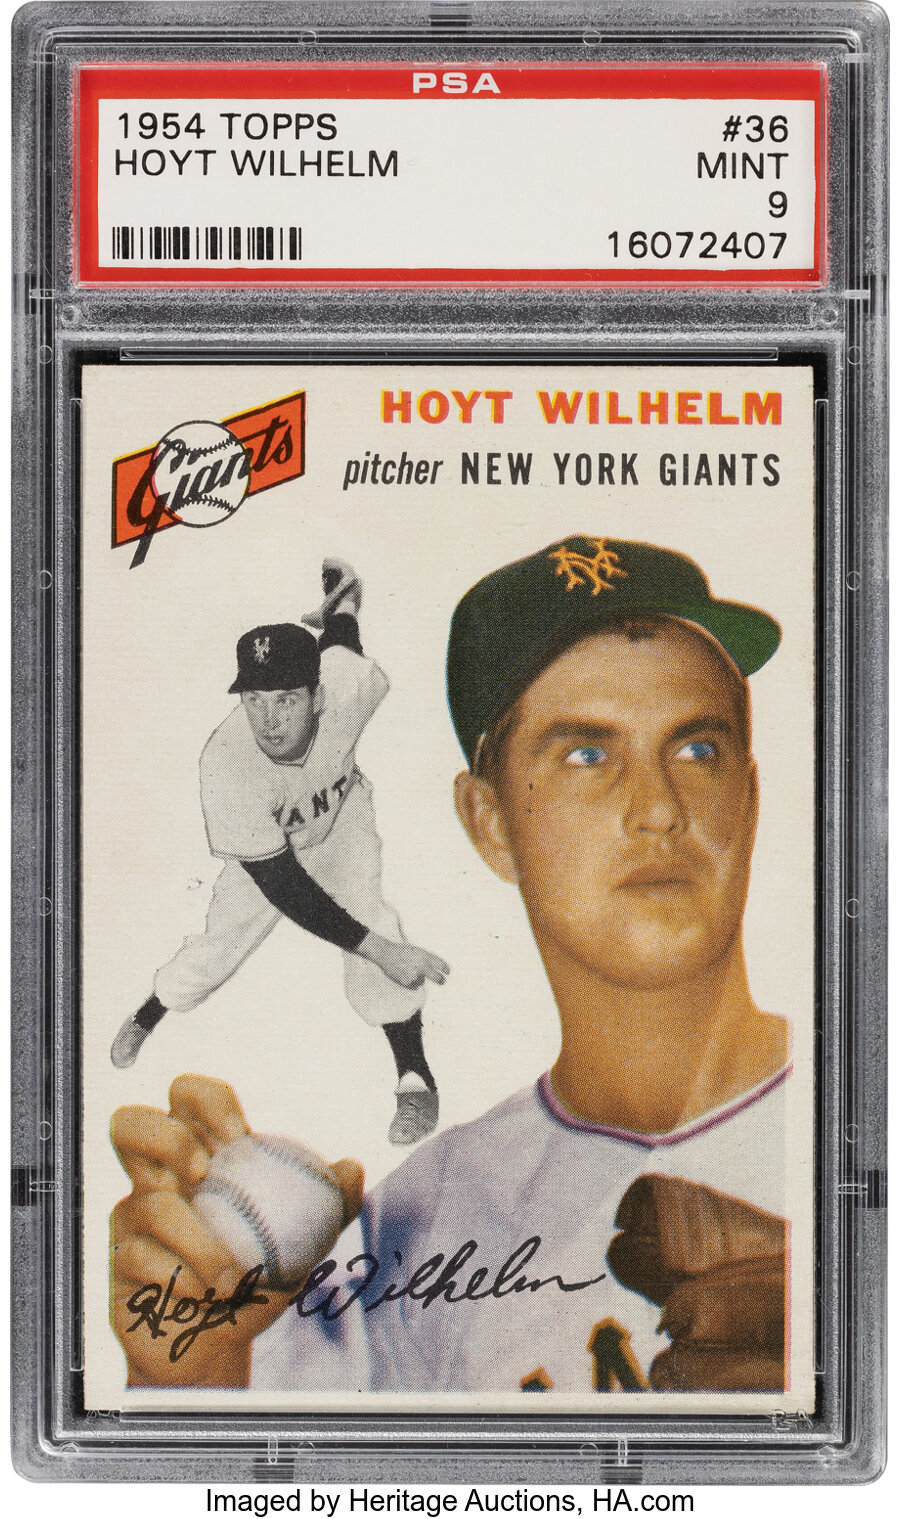 1954 Topps Hoyt Wilhelm #36 PSA Mint 9 - Only One Higher!